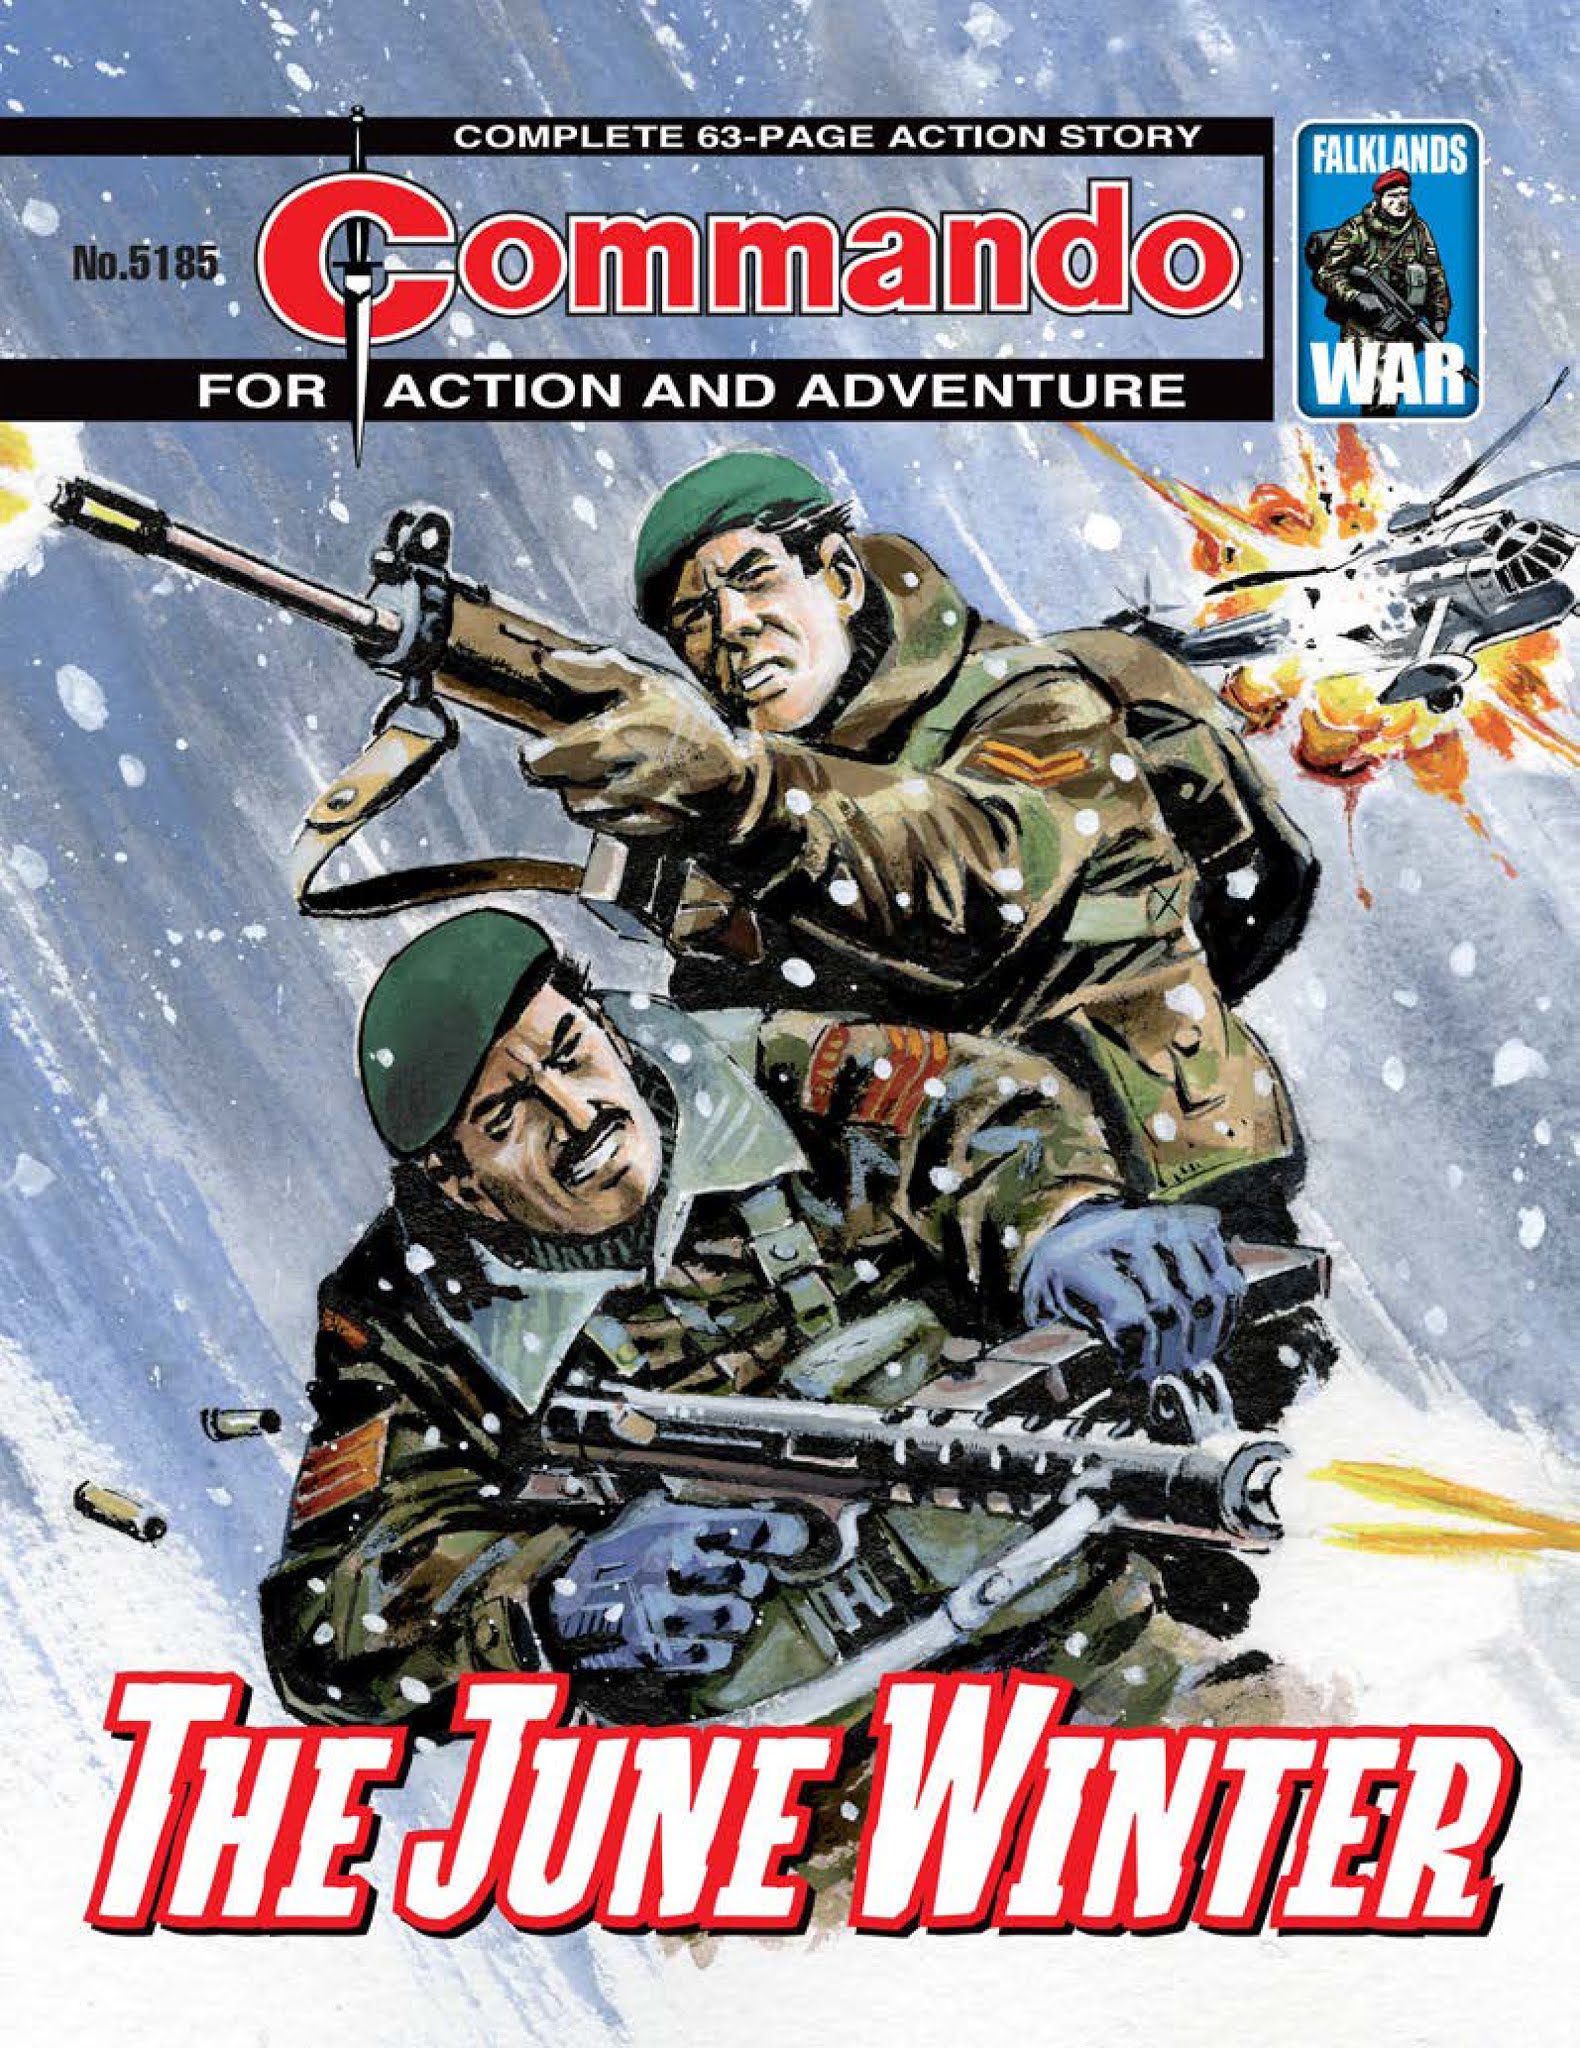 Read online Commando: For Action and Adventure comic -  Issue #5185 - 1